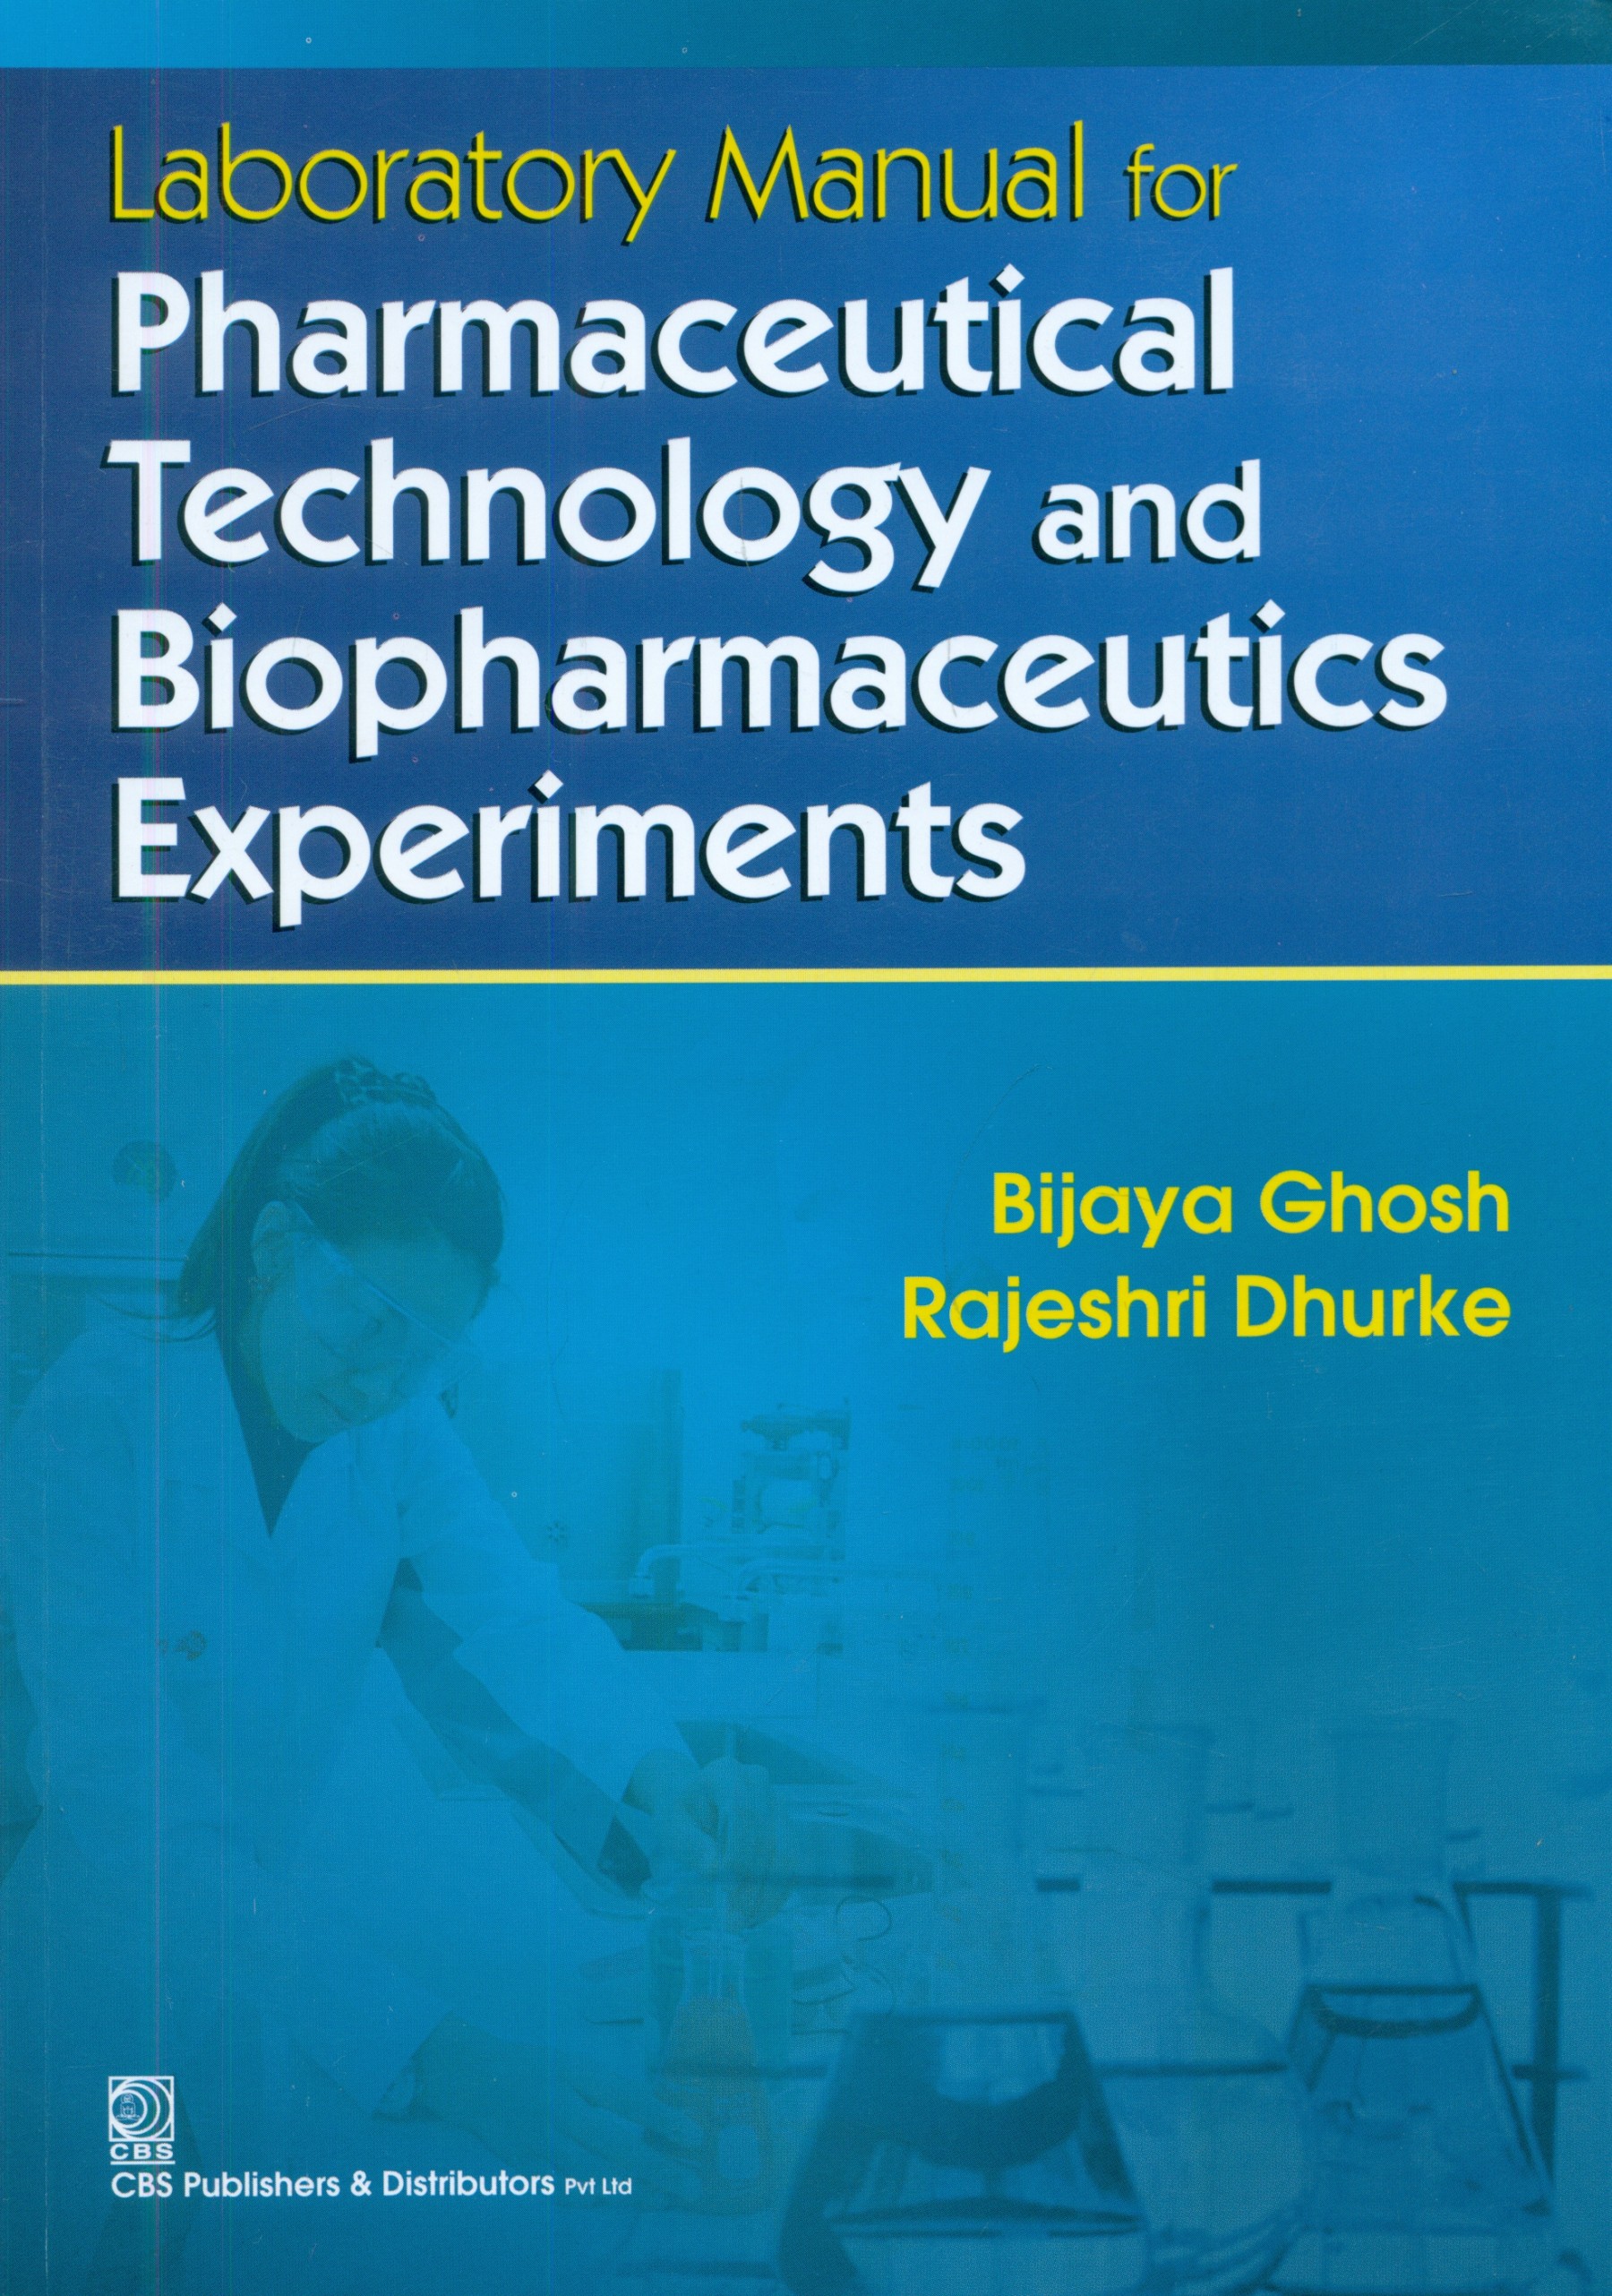 Laboratory Manual for Pharmaceutical Technology and Biopharmaceutics Experiments (3rd Reprint)